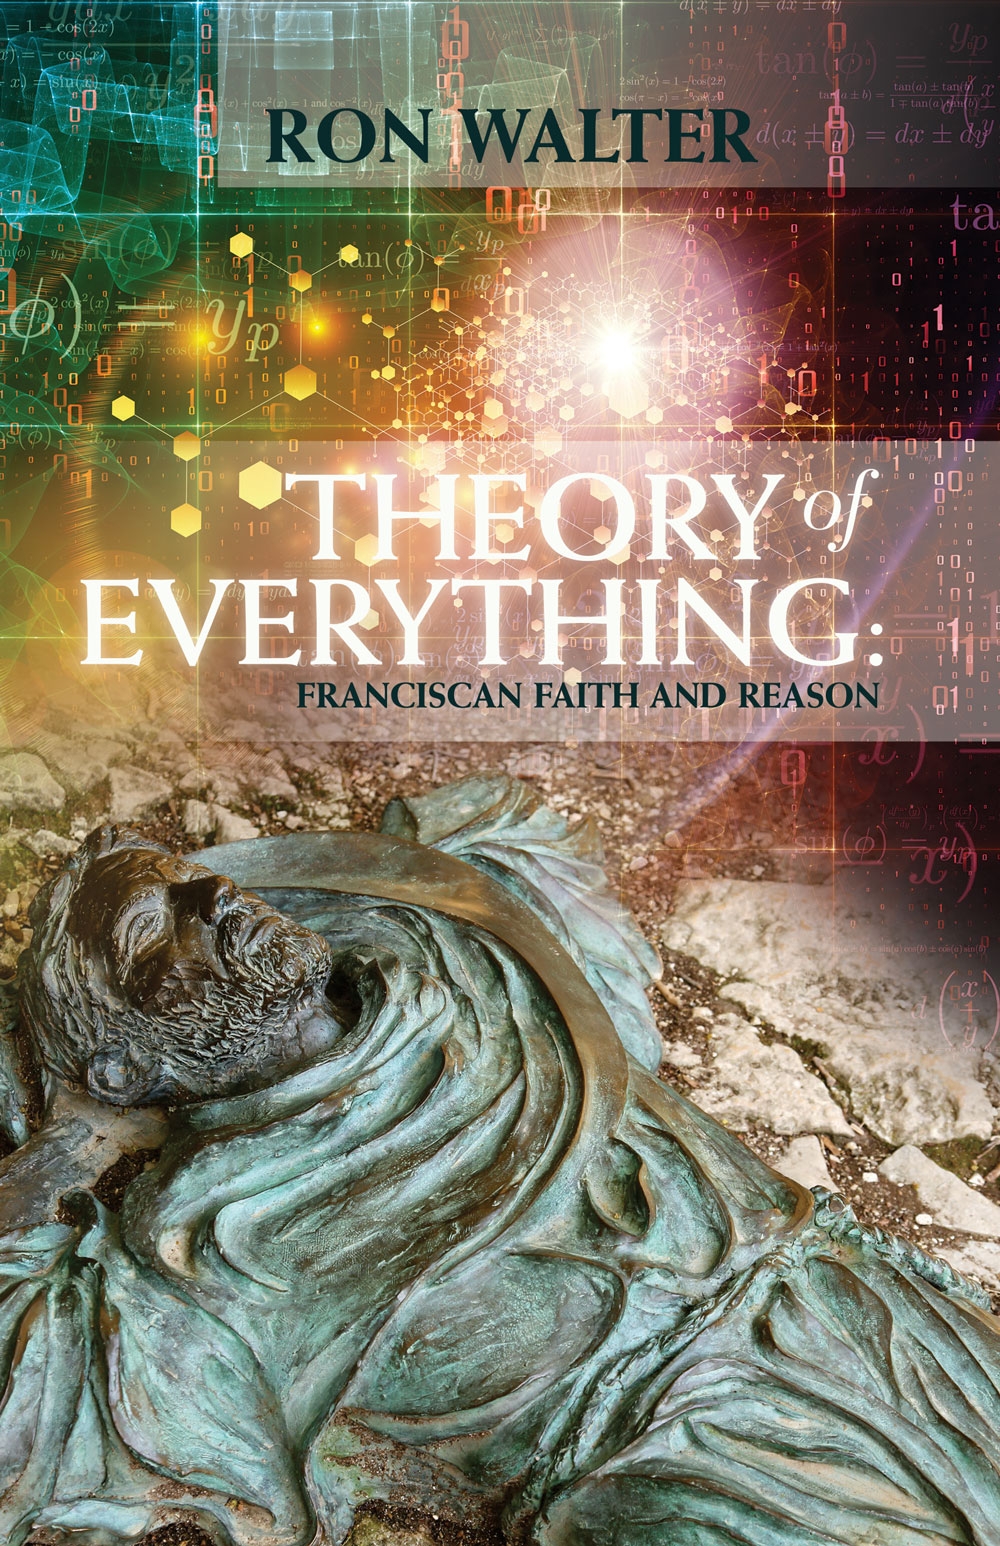 Theory of Everything: Franciscan Faith and Reason by Ron Walter